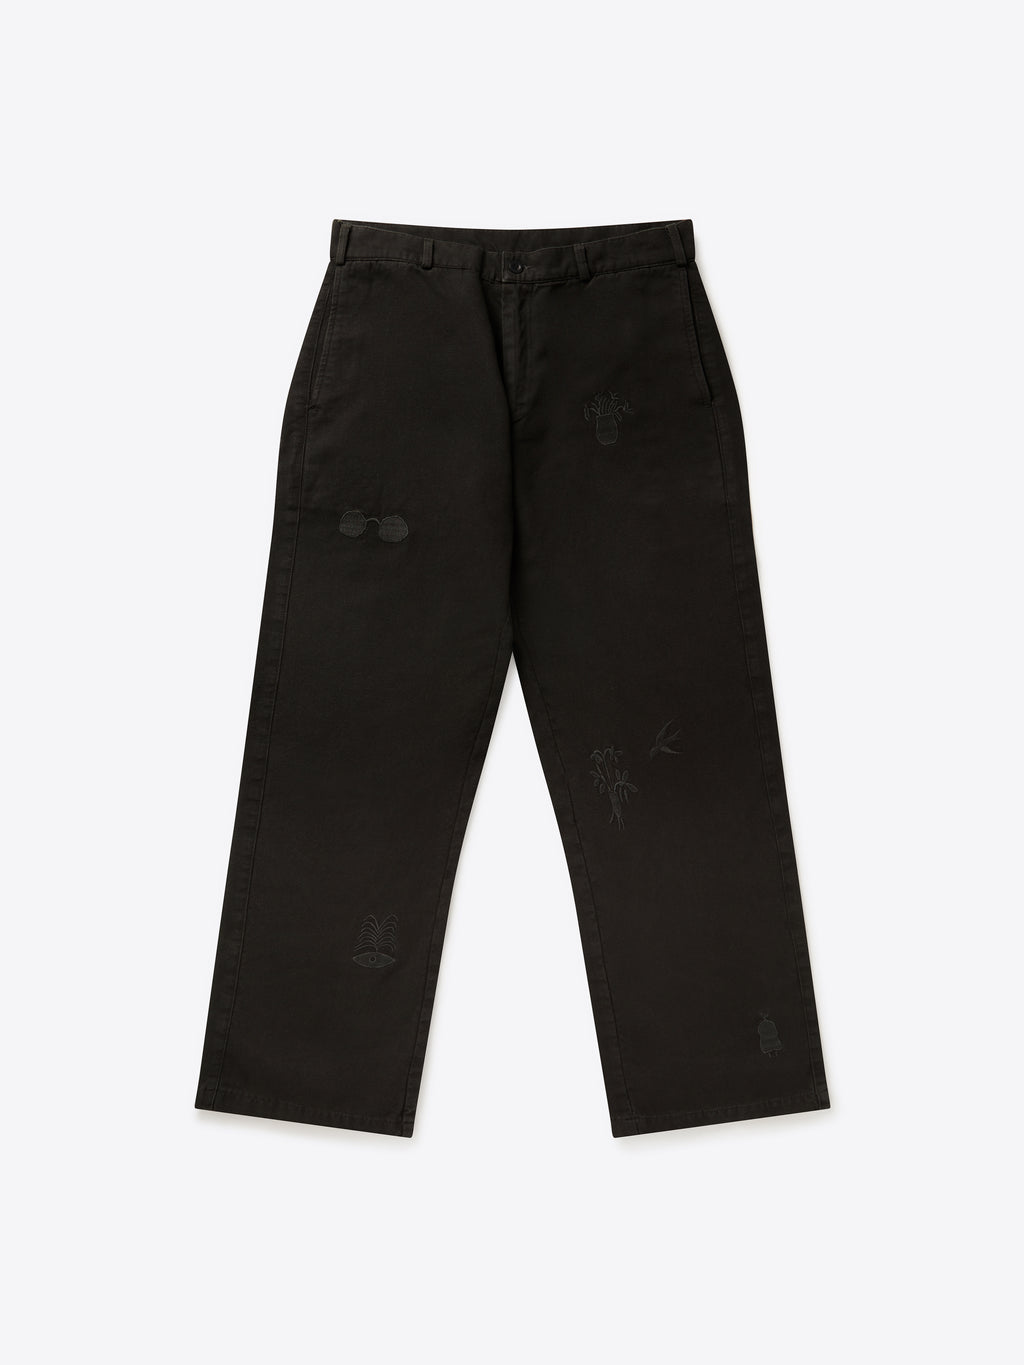 Paix Trousers - Washed Black